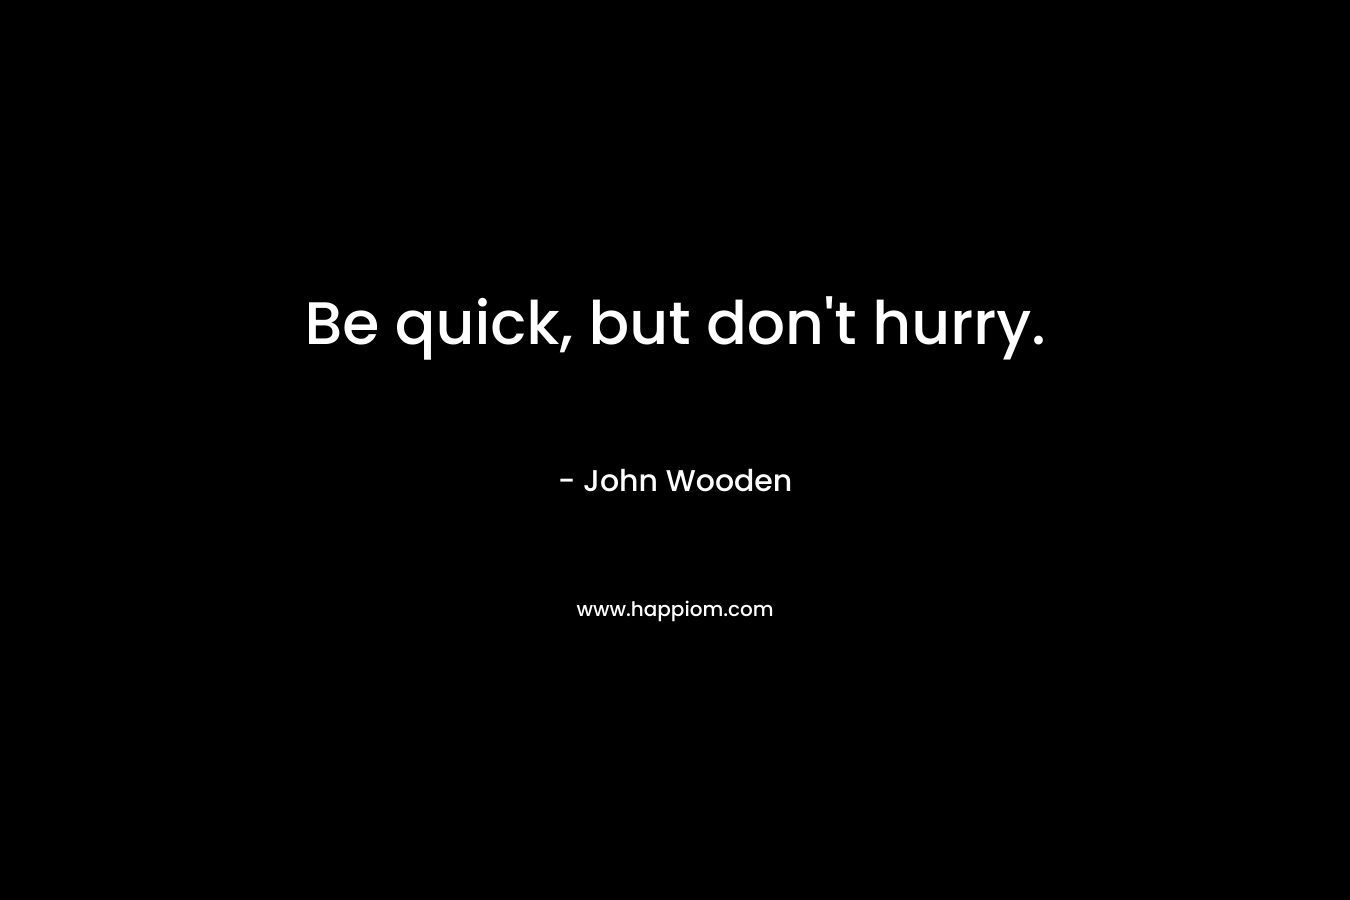 Be quick, but don’t hurry. – John Wooden